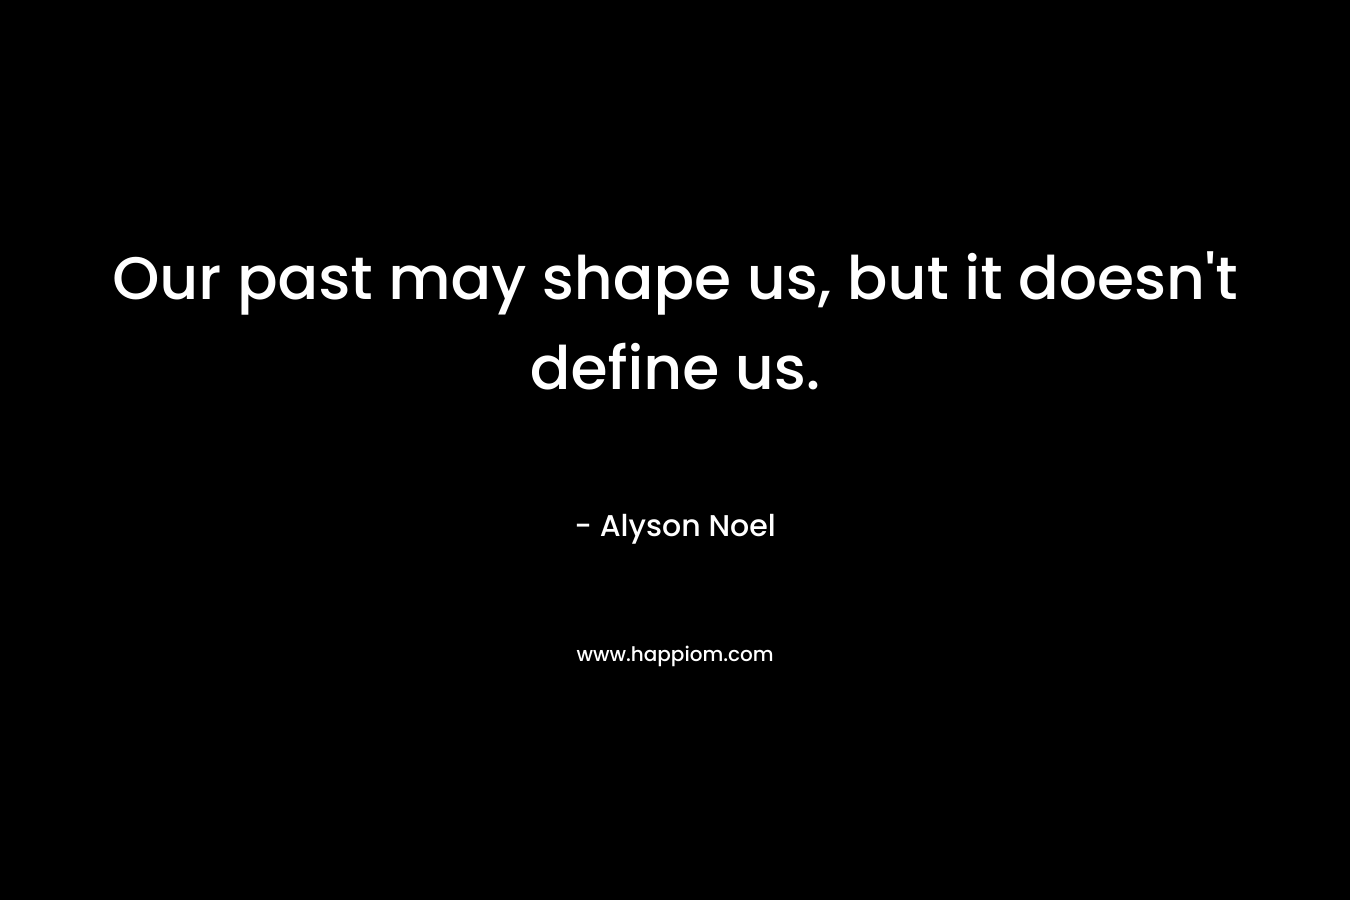 Our past may shape us, but it doesn’t define us. – Alyson Noel